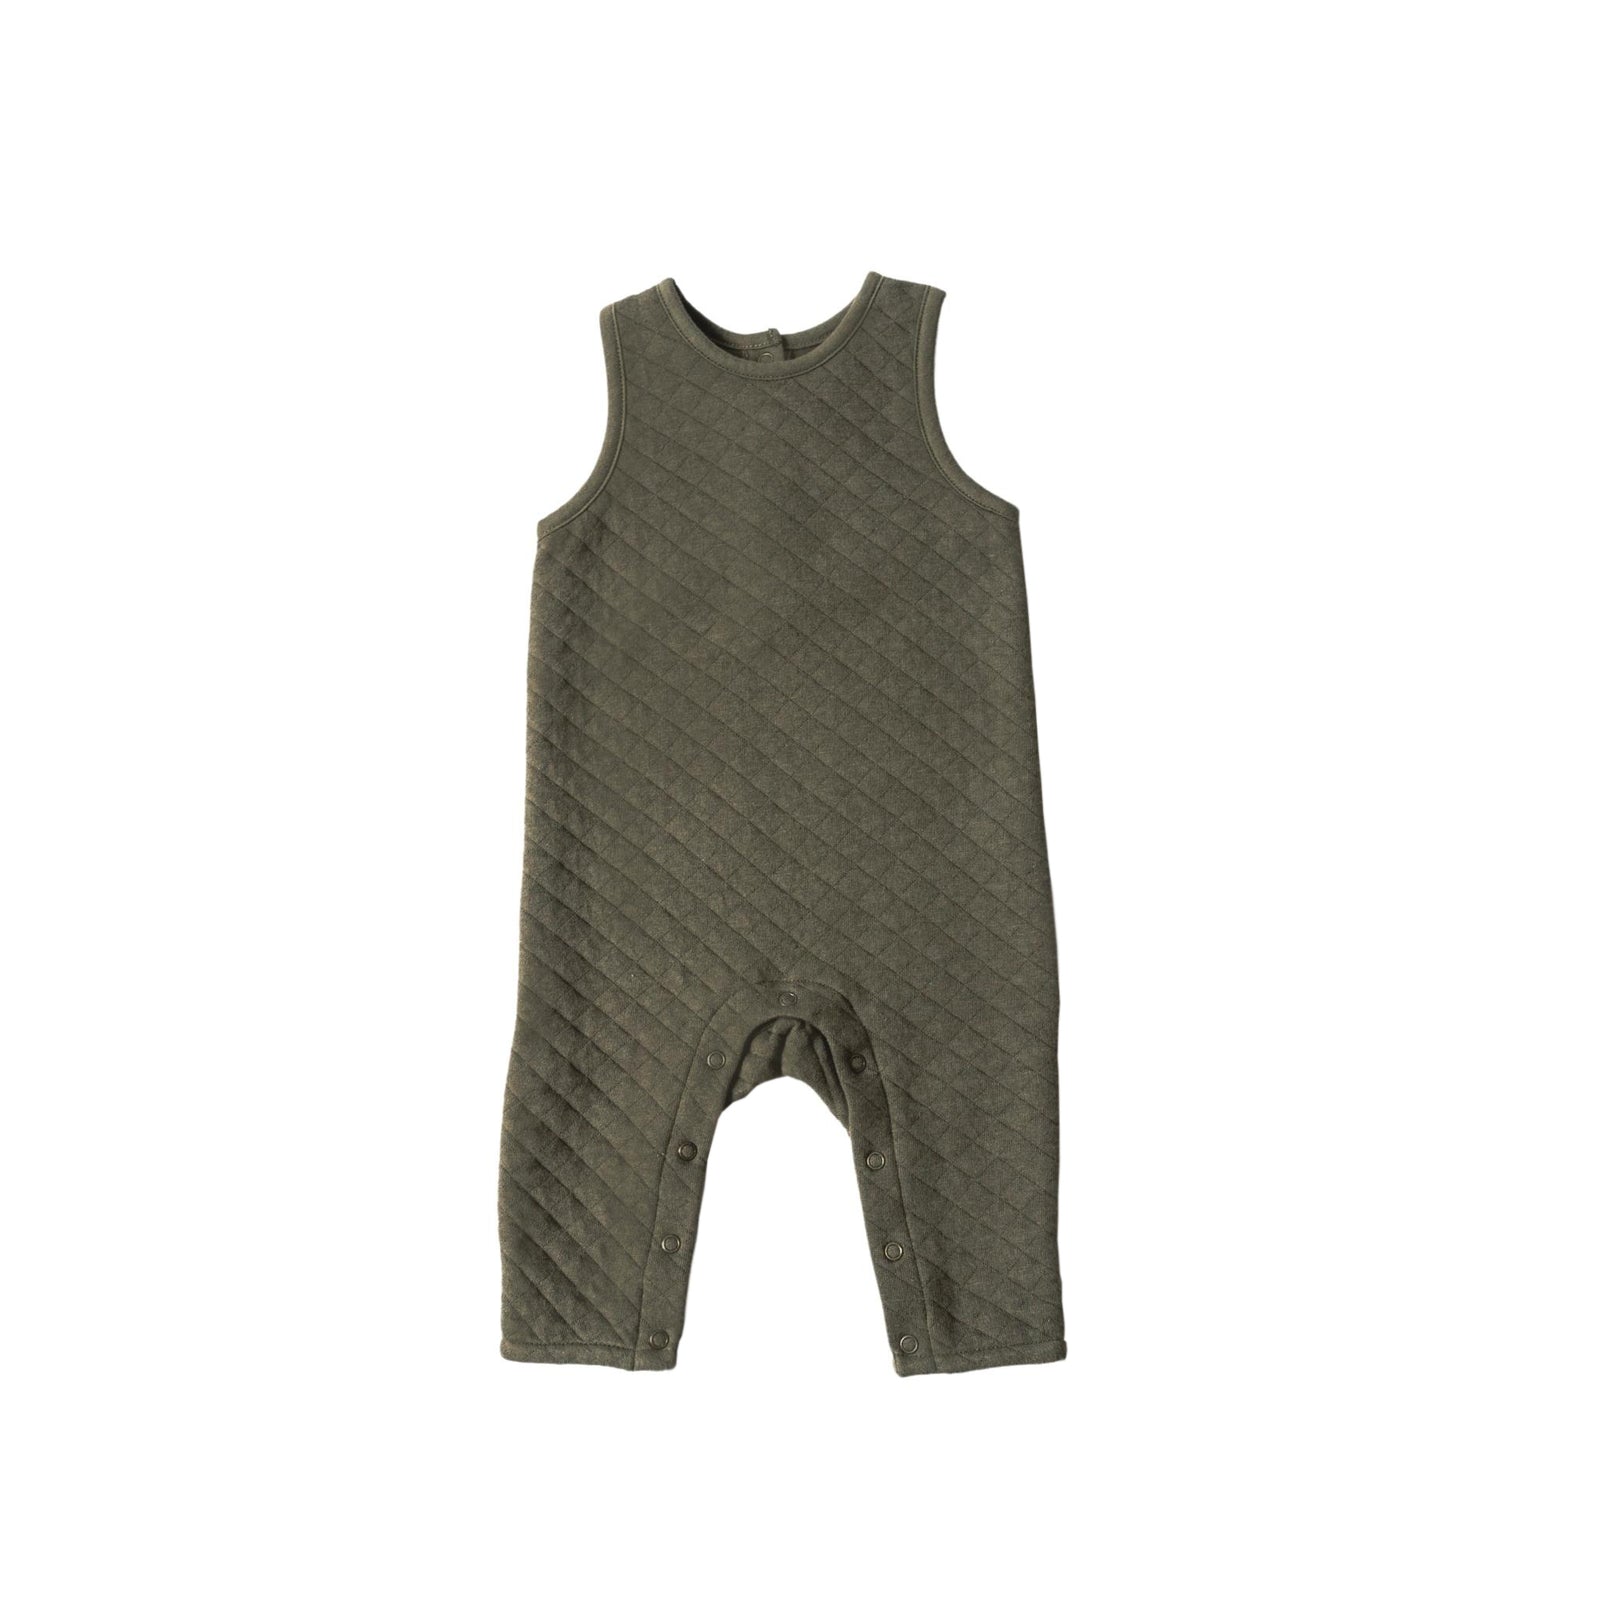 Cozy Romper Overalls Overall Pehr Olive 0 - 3 mos. 